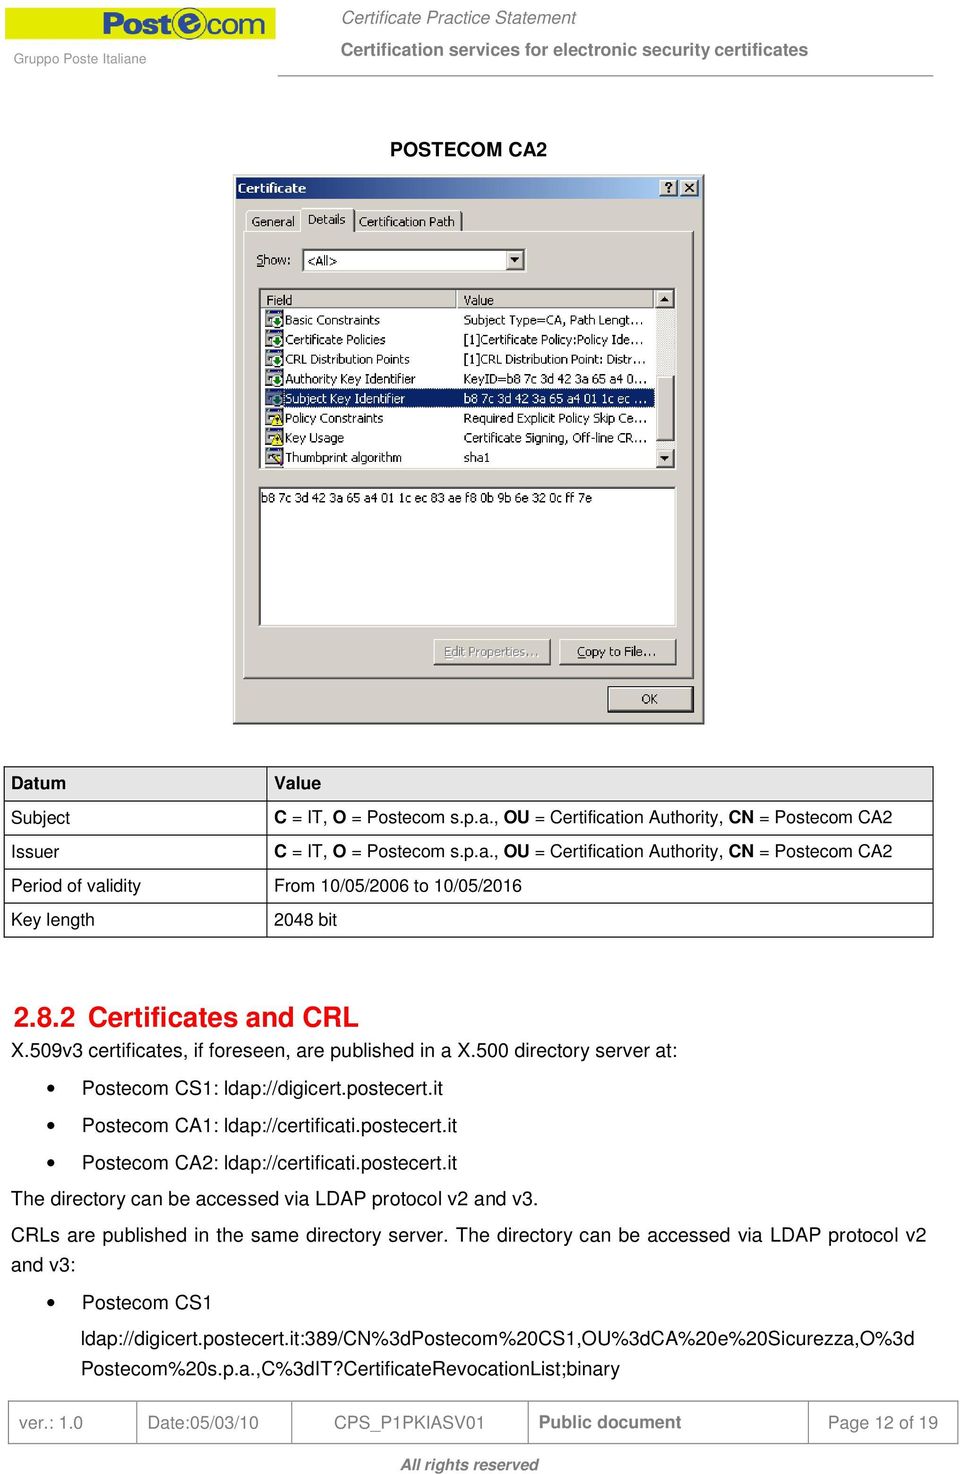 postecert.it The directory can be accessed via LDAP protocol v2 and v3. CRLs are published in the same directory server.